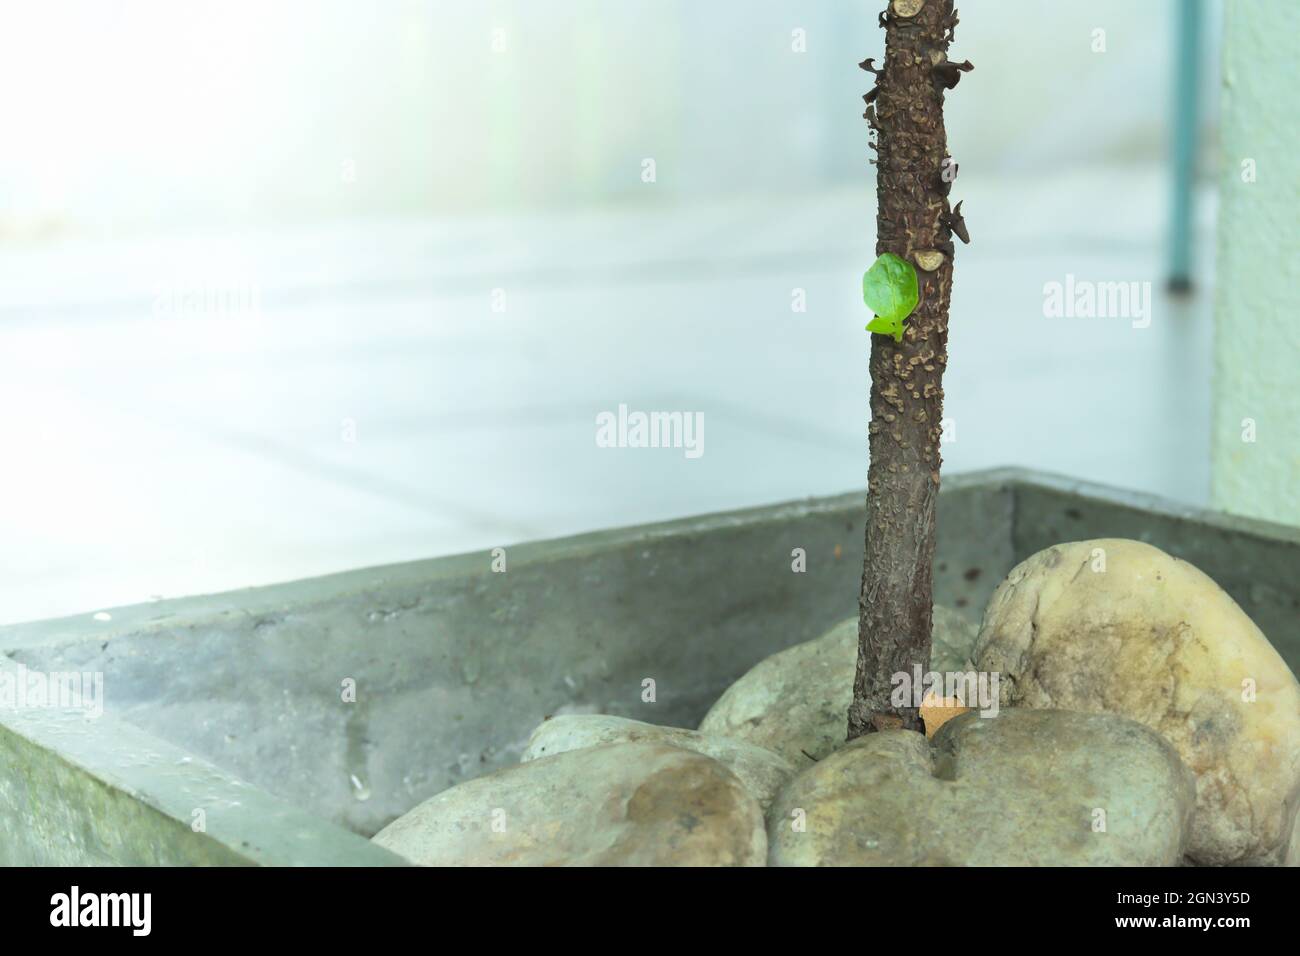 Potted plant with small green leaves growing out in the middle of the trunk. Copy space. Stock Photo